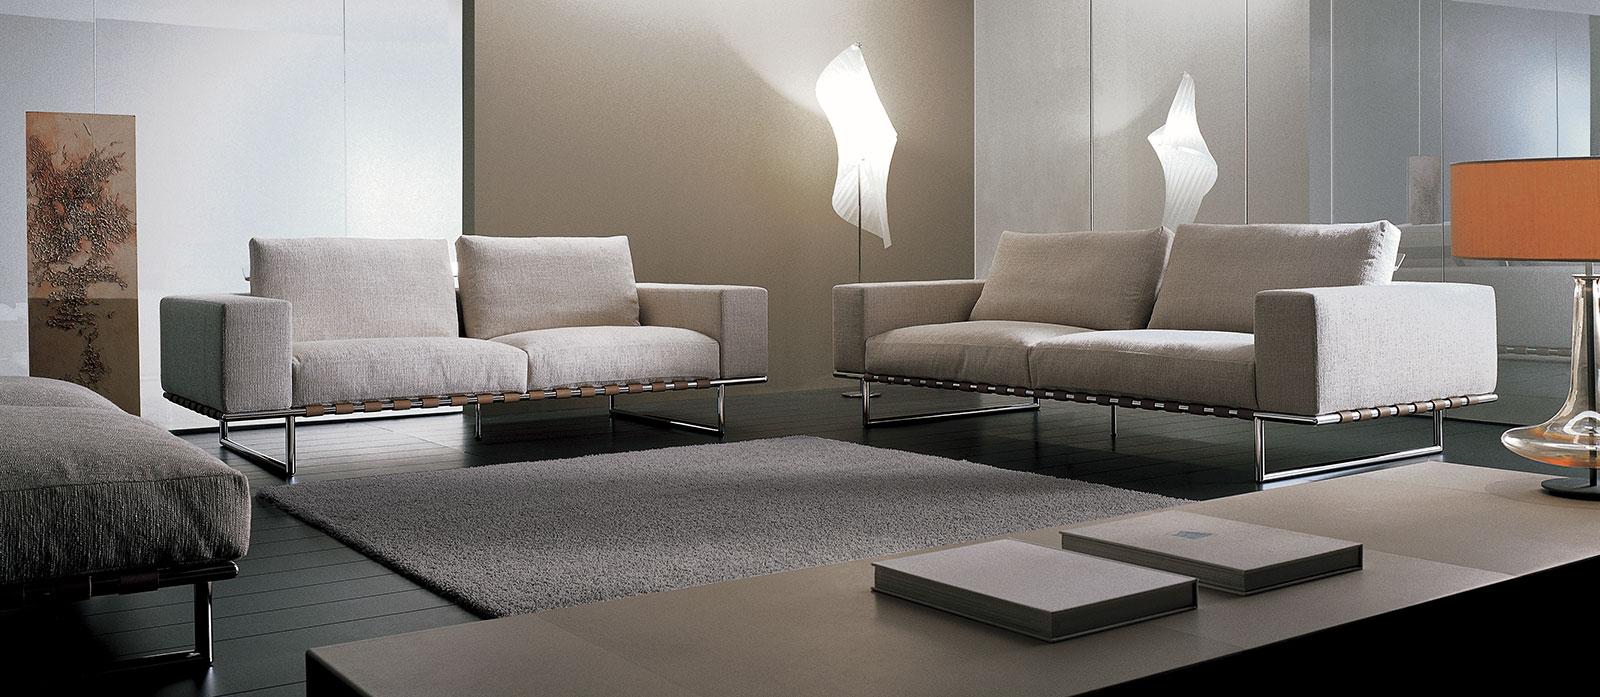 Arrange cave is there Kristall 2 Seater Luxury Leather Sofa | Shop Online - Italy Dream Design